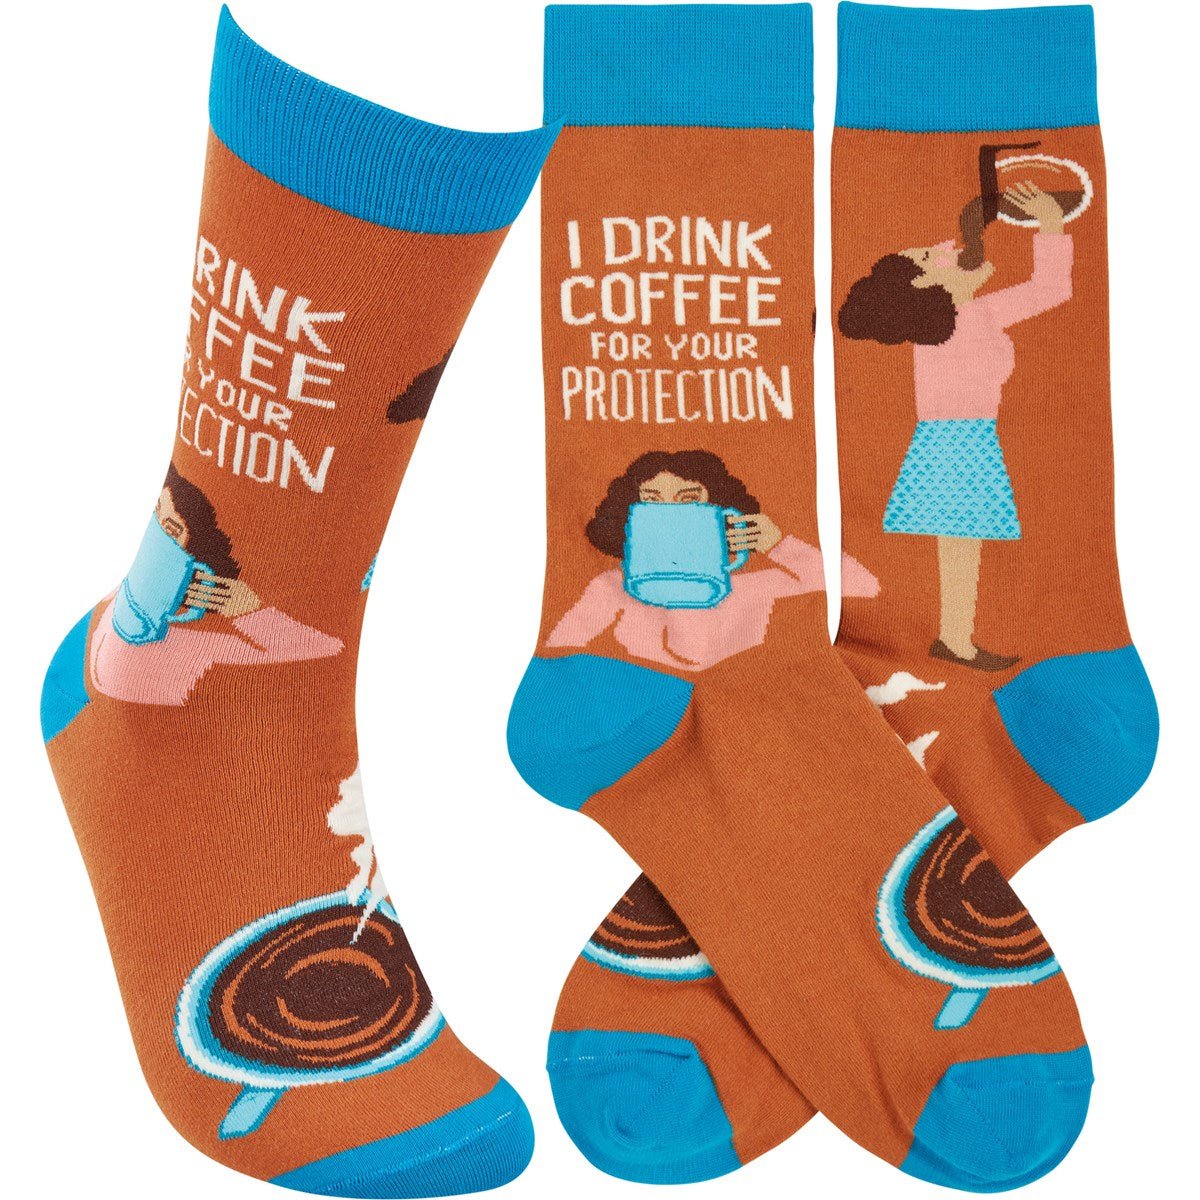 I Drink Coffee For Your Protection Funny Socks Blue and Brown